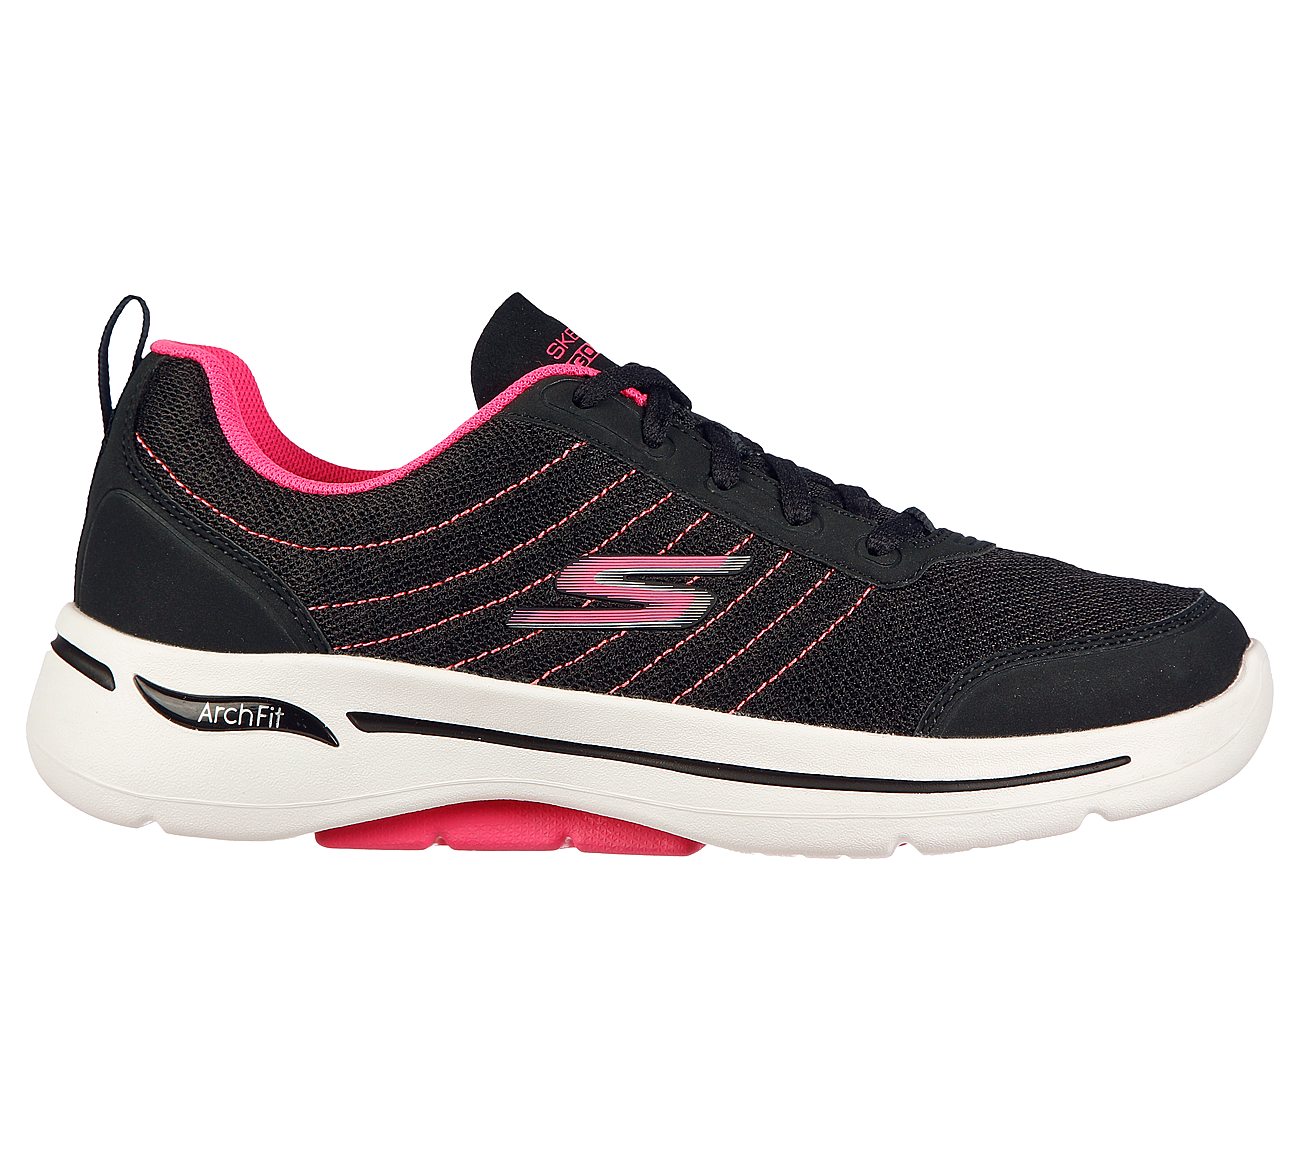 GO WALK ARCH FIT-TRUE VISION, BLACK/PINK Footwear Lateral View